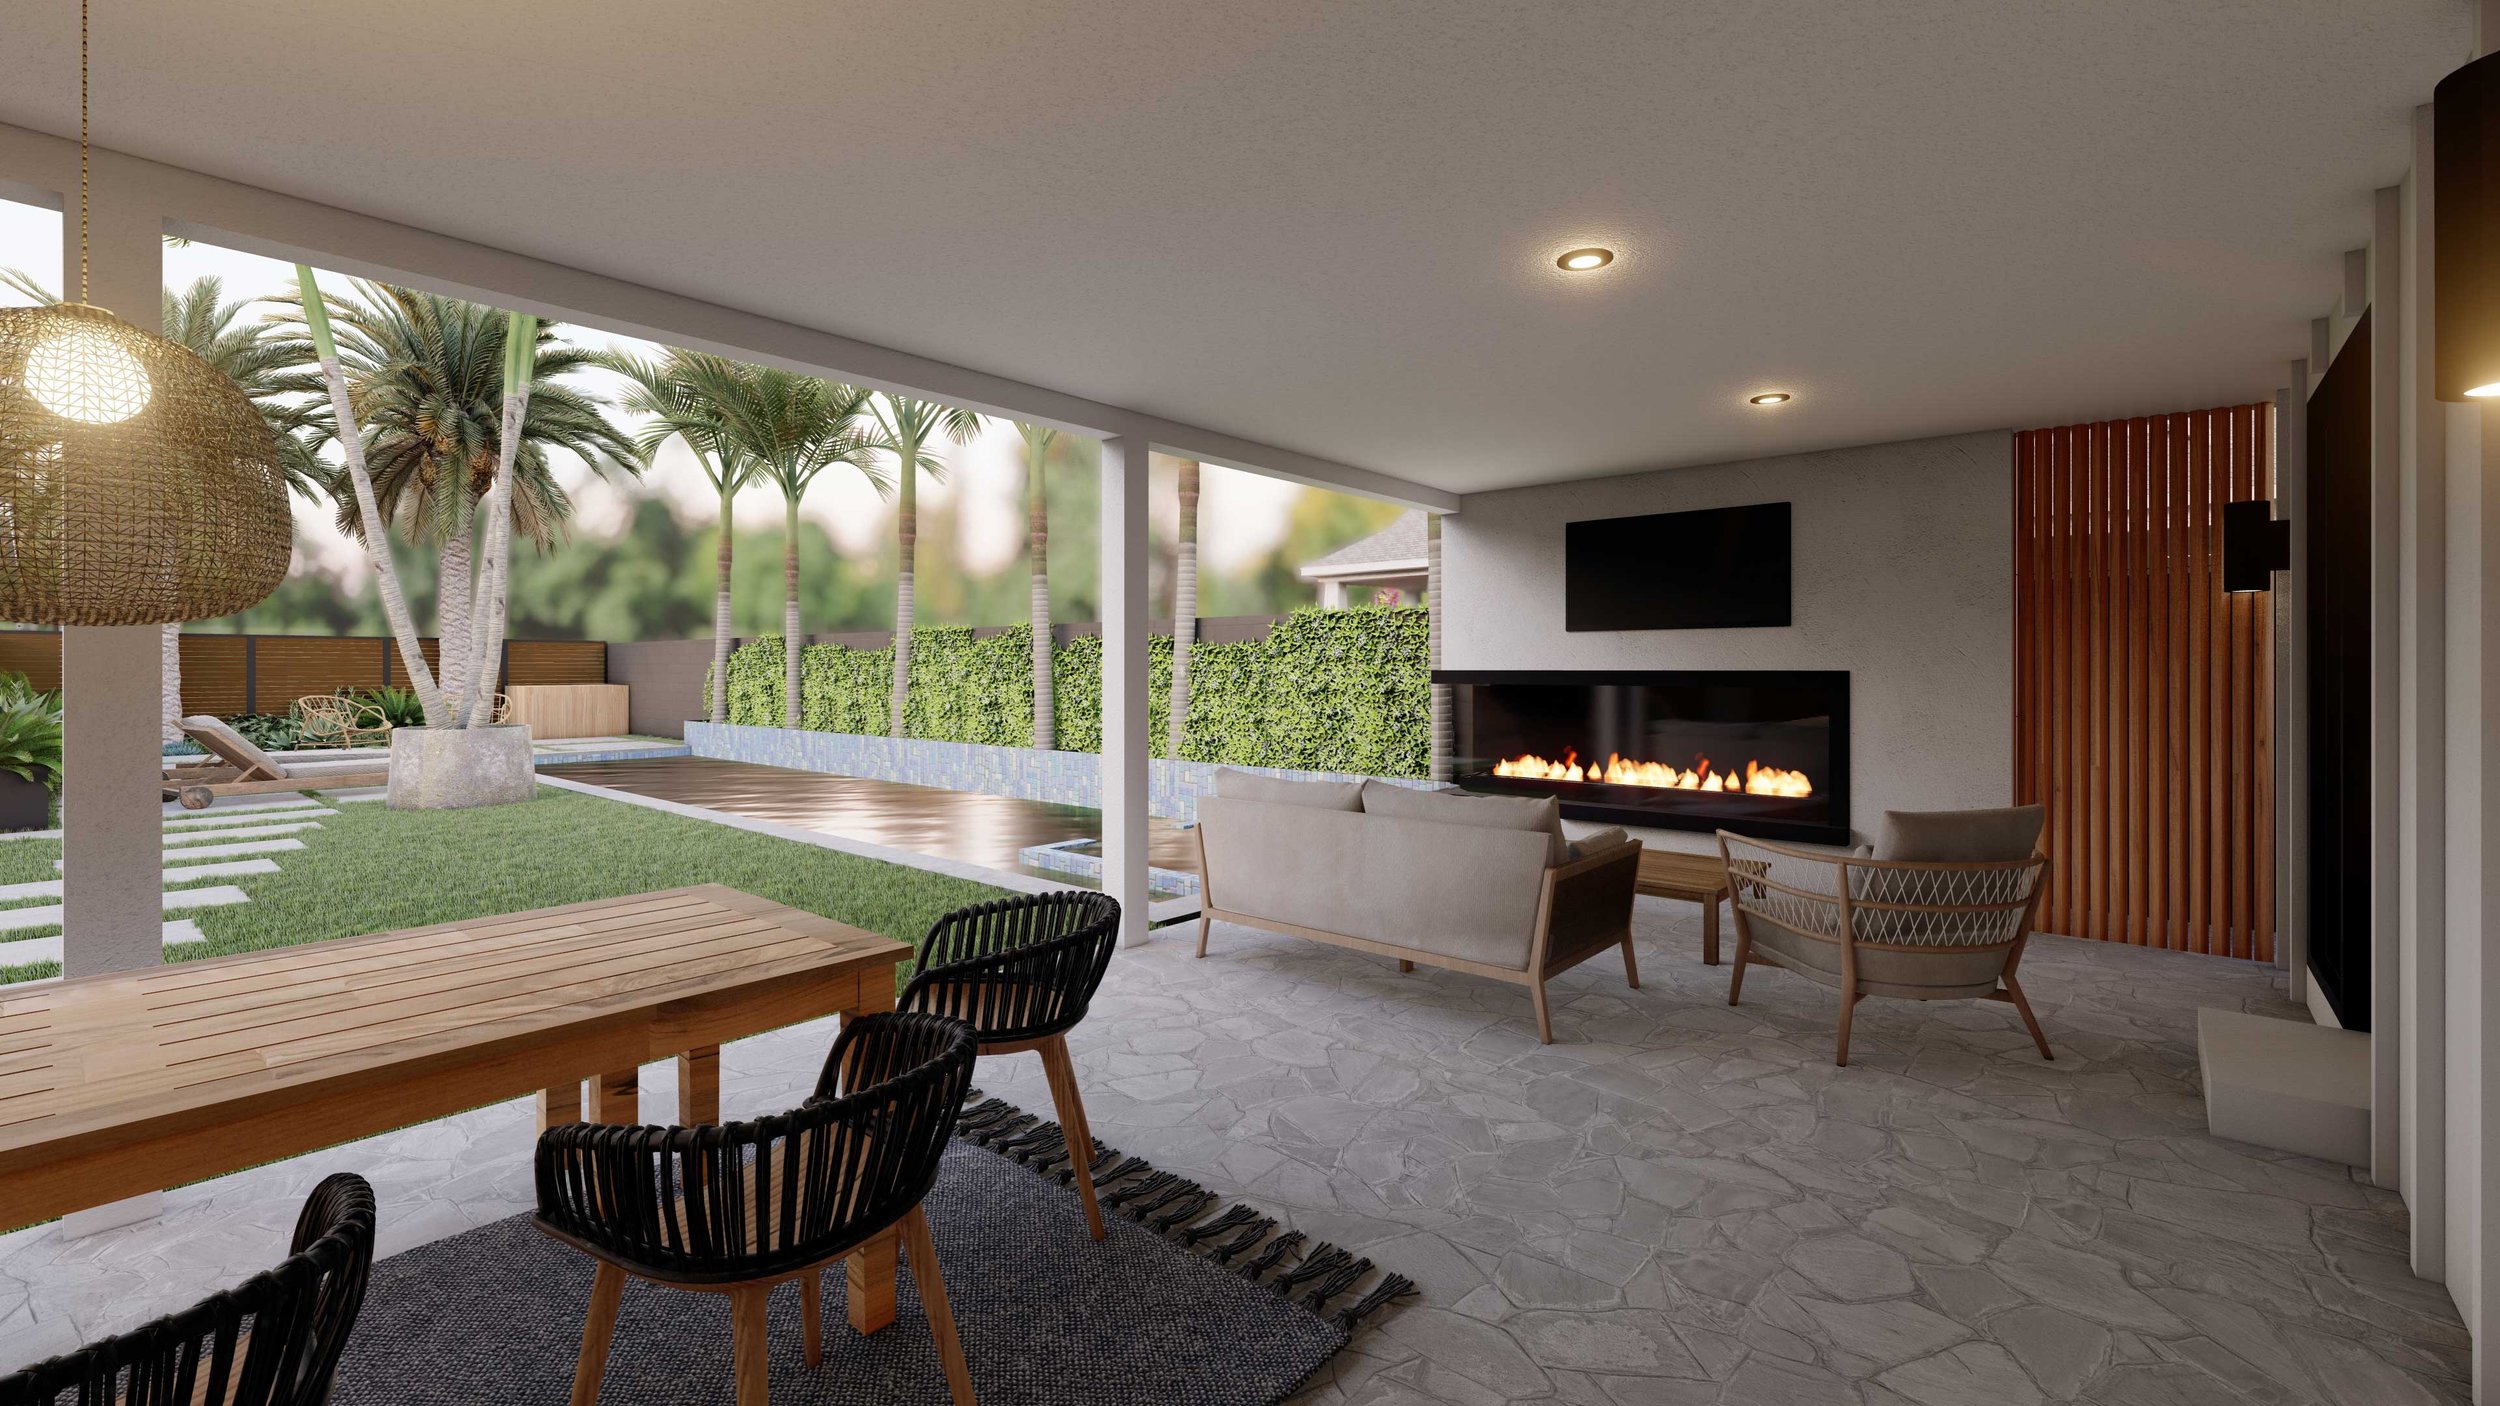 Flexible patio space in Huntington Beach, CA can quickly transform to accommodate more guests